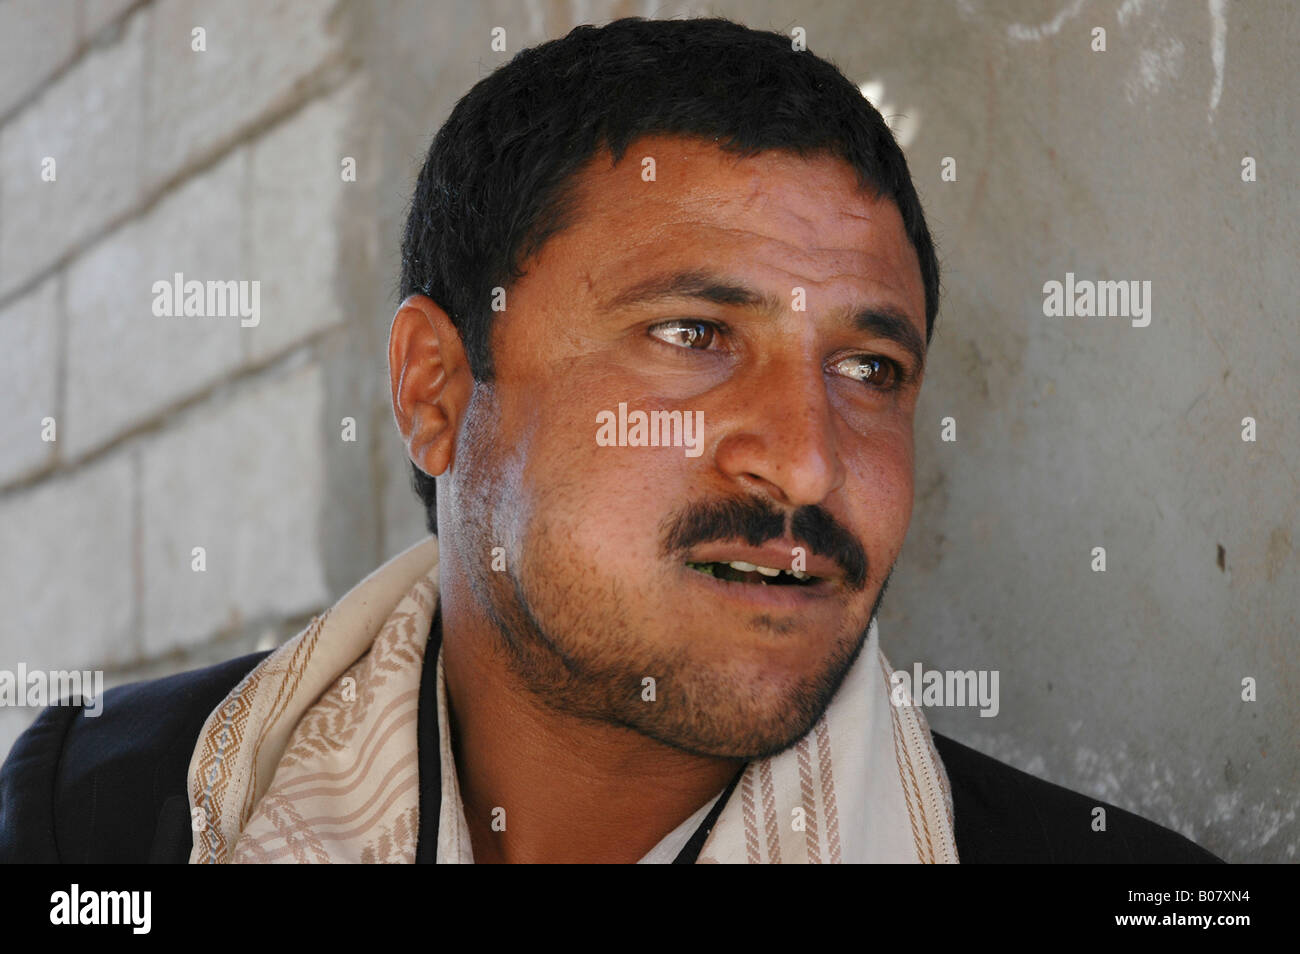 A man with one cheek bulging from the qat he has chewed for hours is a common sight across Yemen Stock Photo